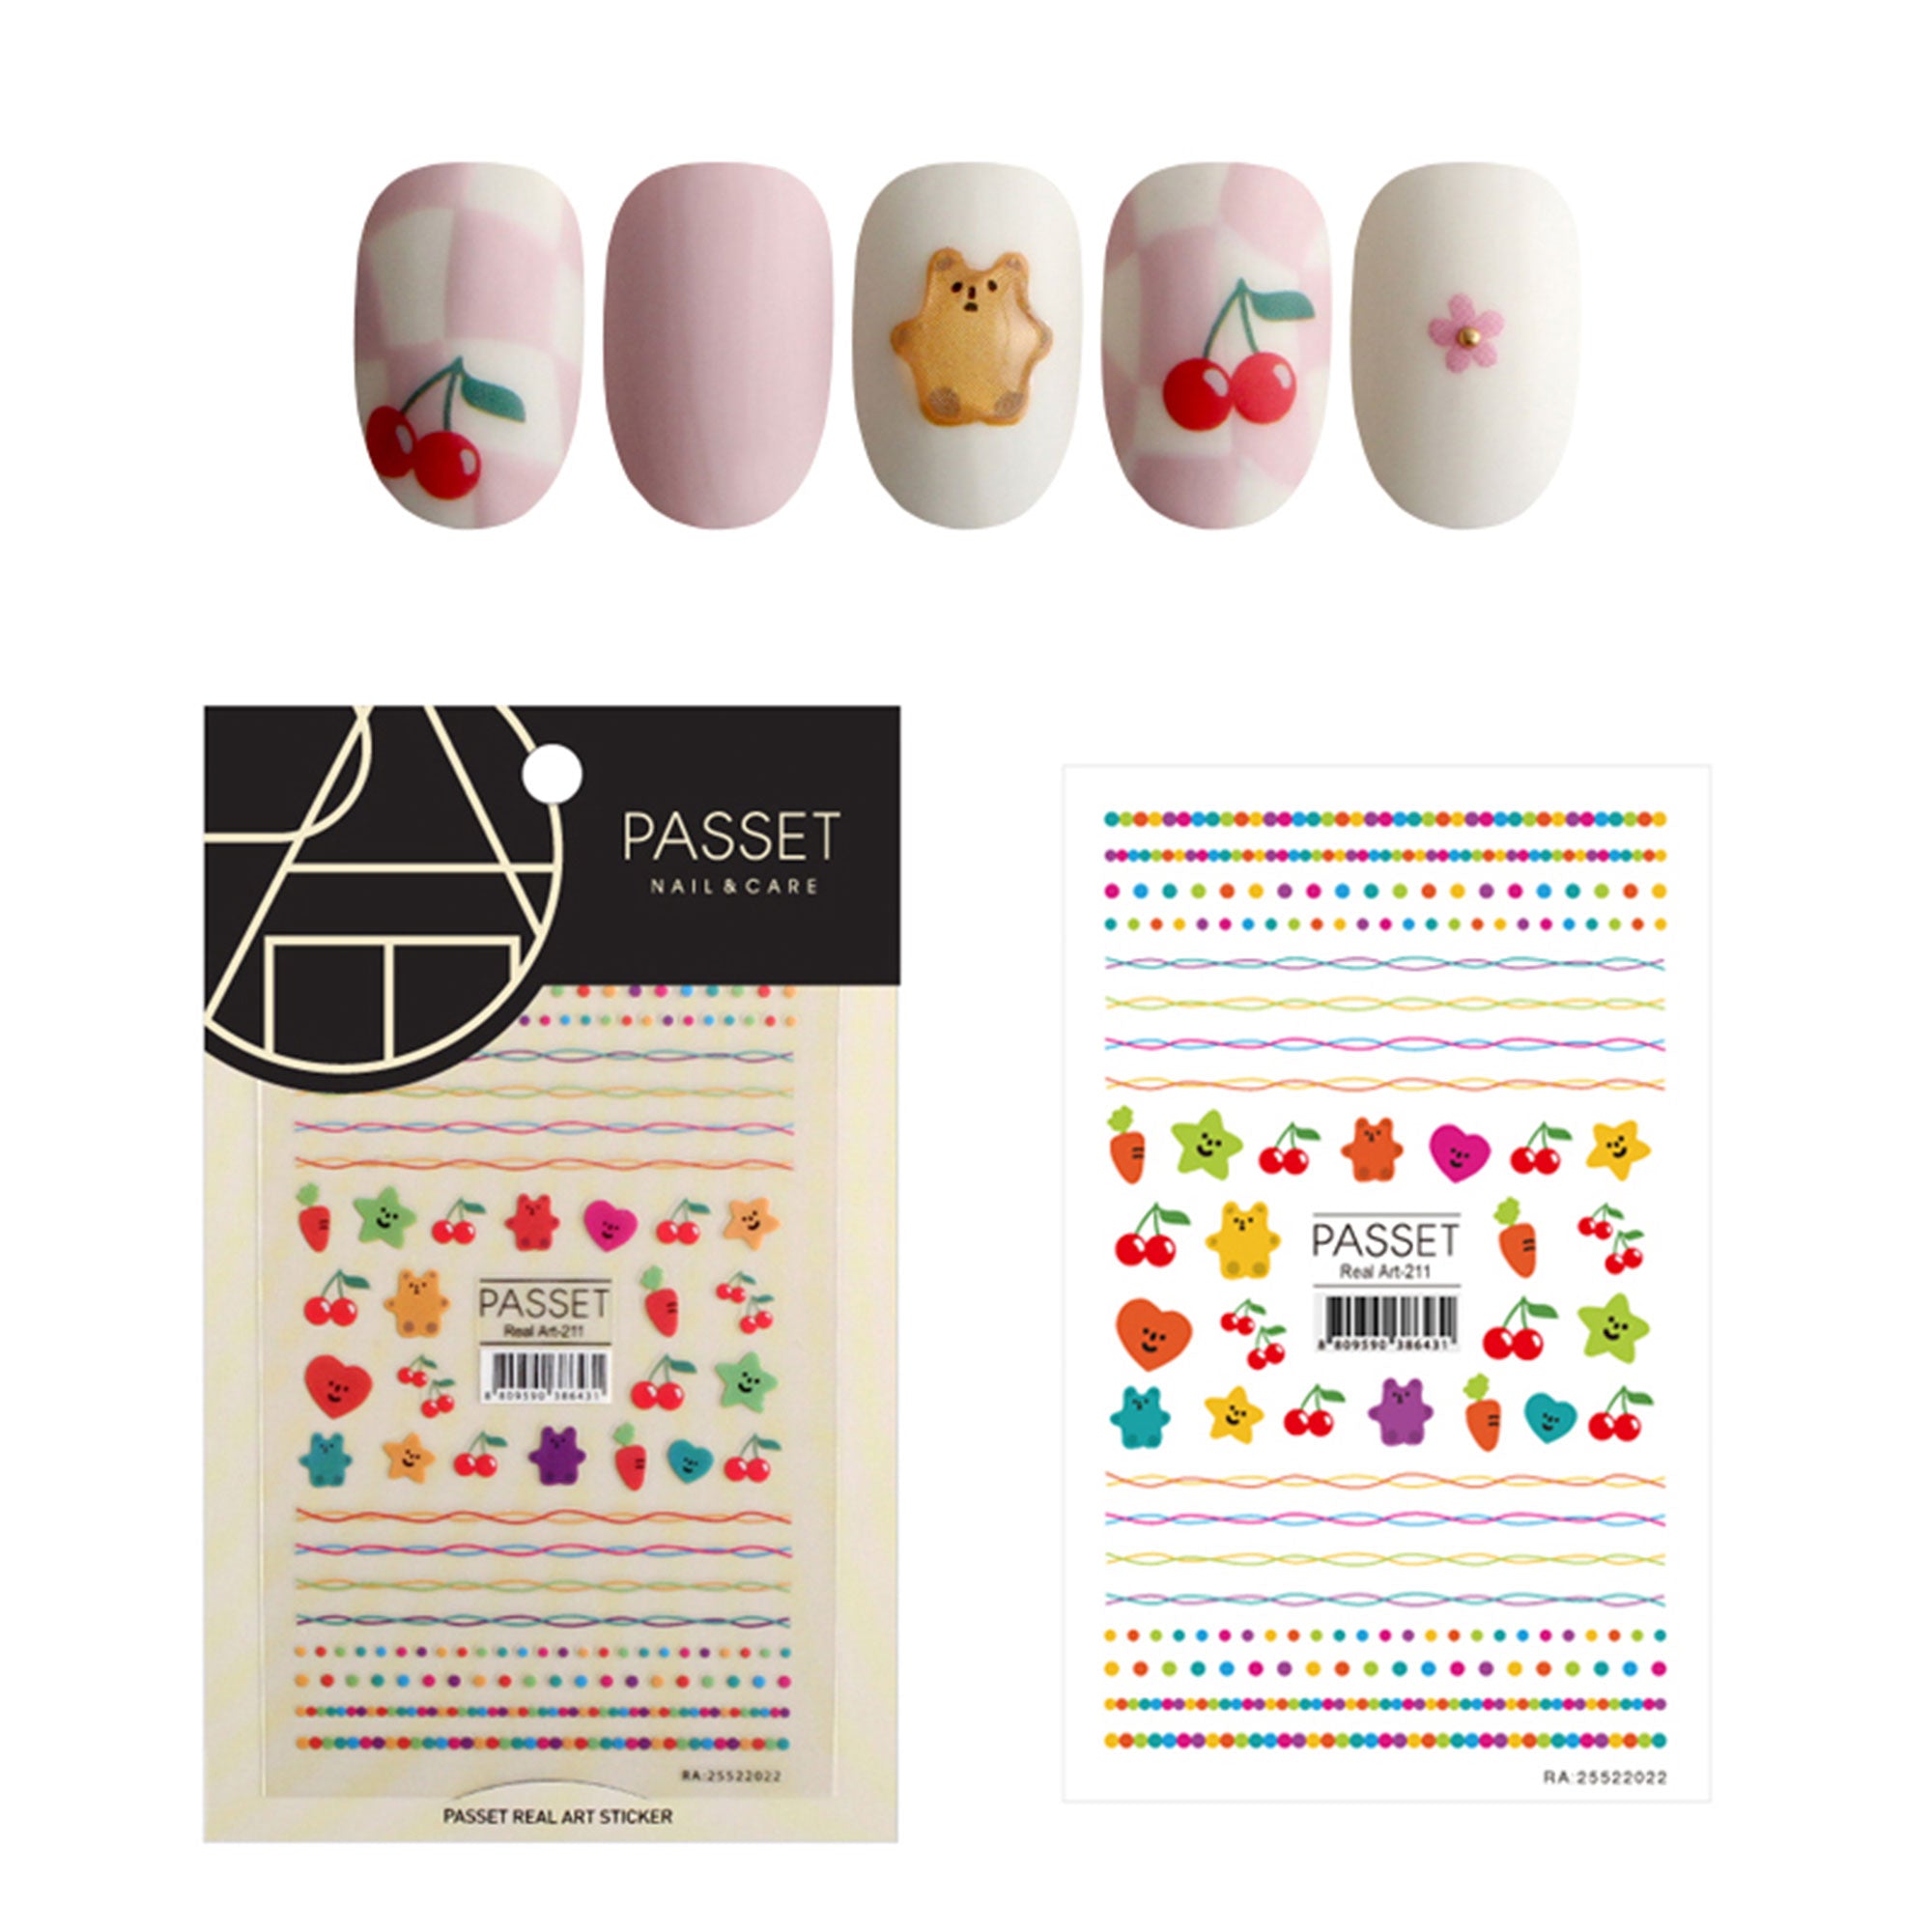 Passet Nail Art Sticker / Rainbow Friends Cherry Fruits Lines Dots Y2K Jelly Candy